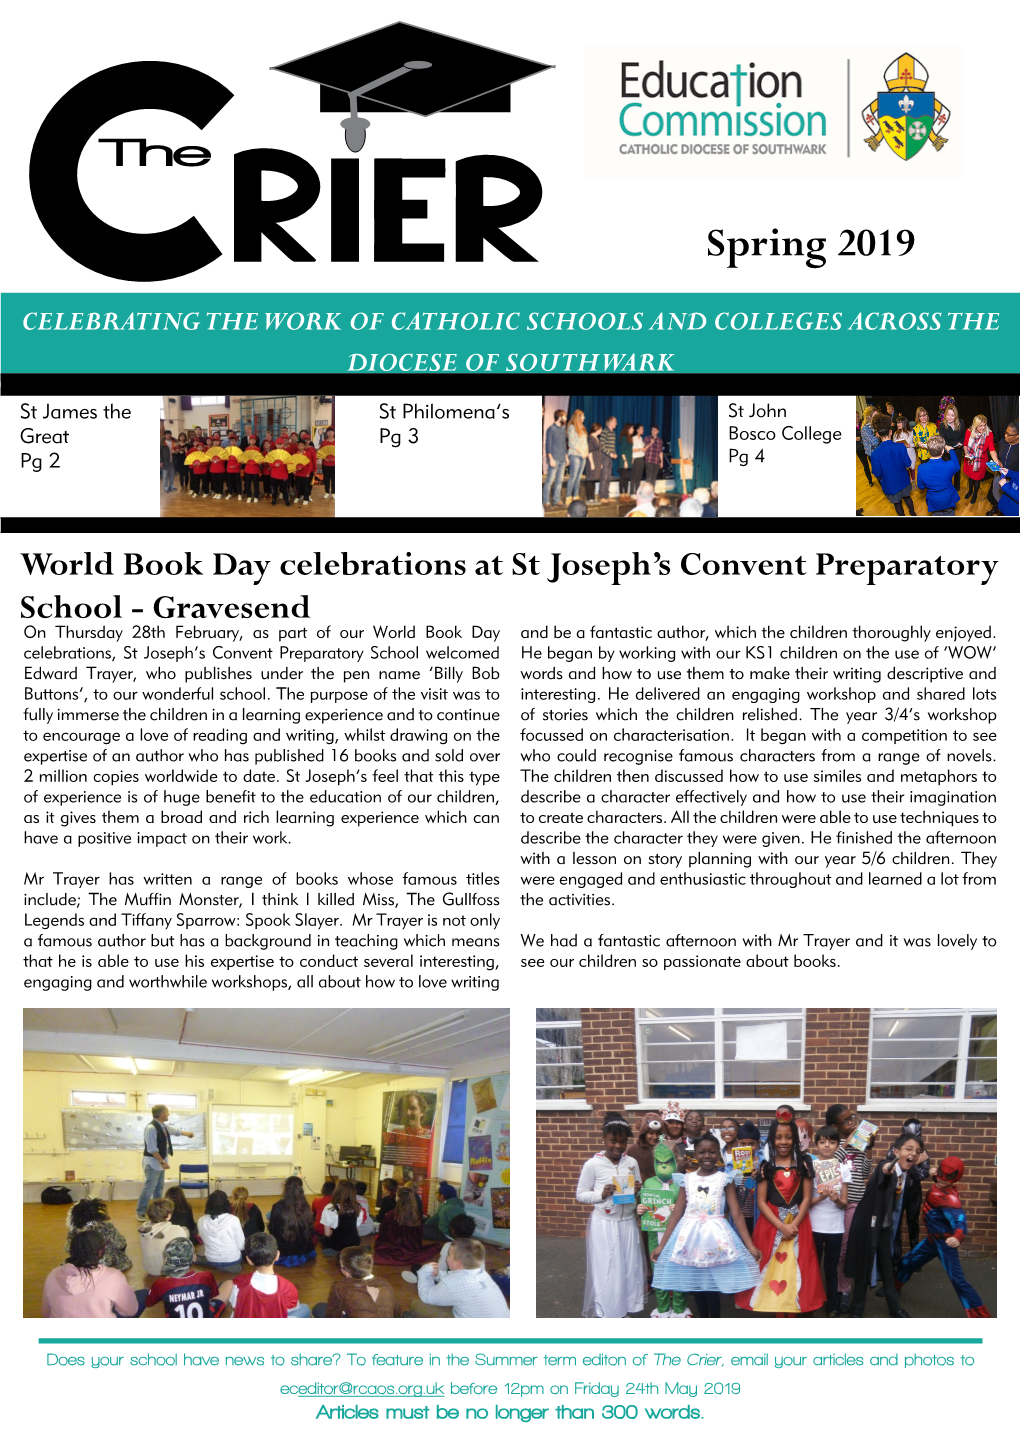 The Crier Spring 2019 Page 2 Petts Wood School Welcomes Chinese Pupils in January, We Hosted Fifteen Students and Their Teachers for a Week from Tianjin, China